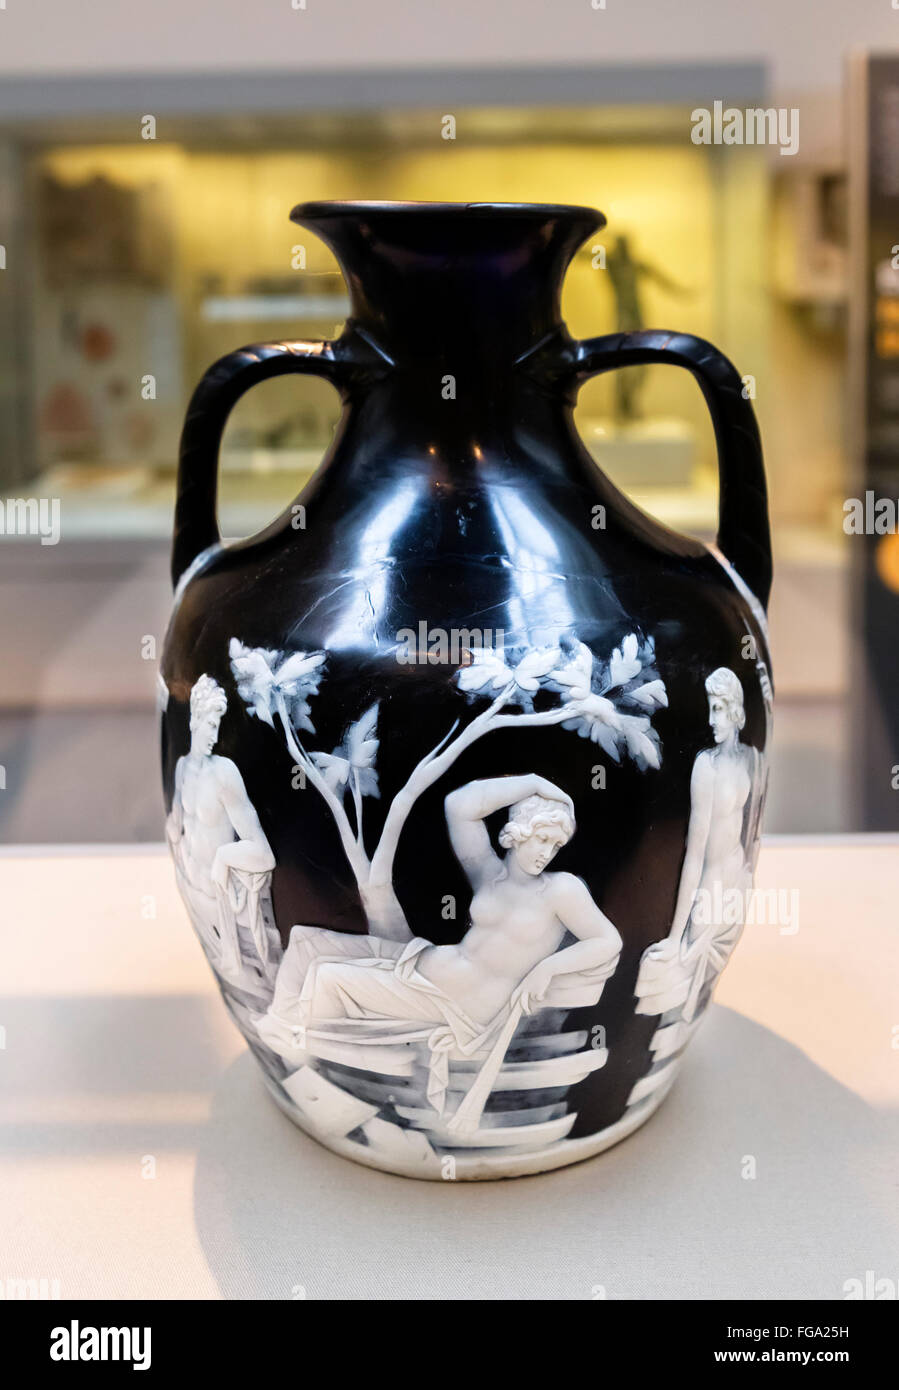 The Portland Vase, a Roman cameo glass vase made between 15 BC and AD 25, Wolfson Gallery, British Museum, London, England, UK Stock Photo